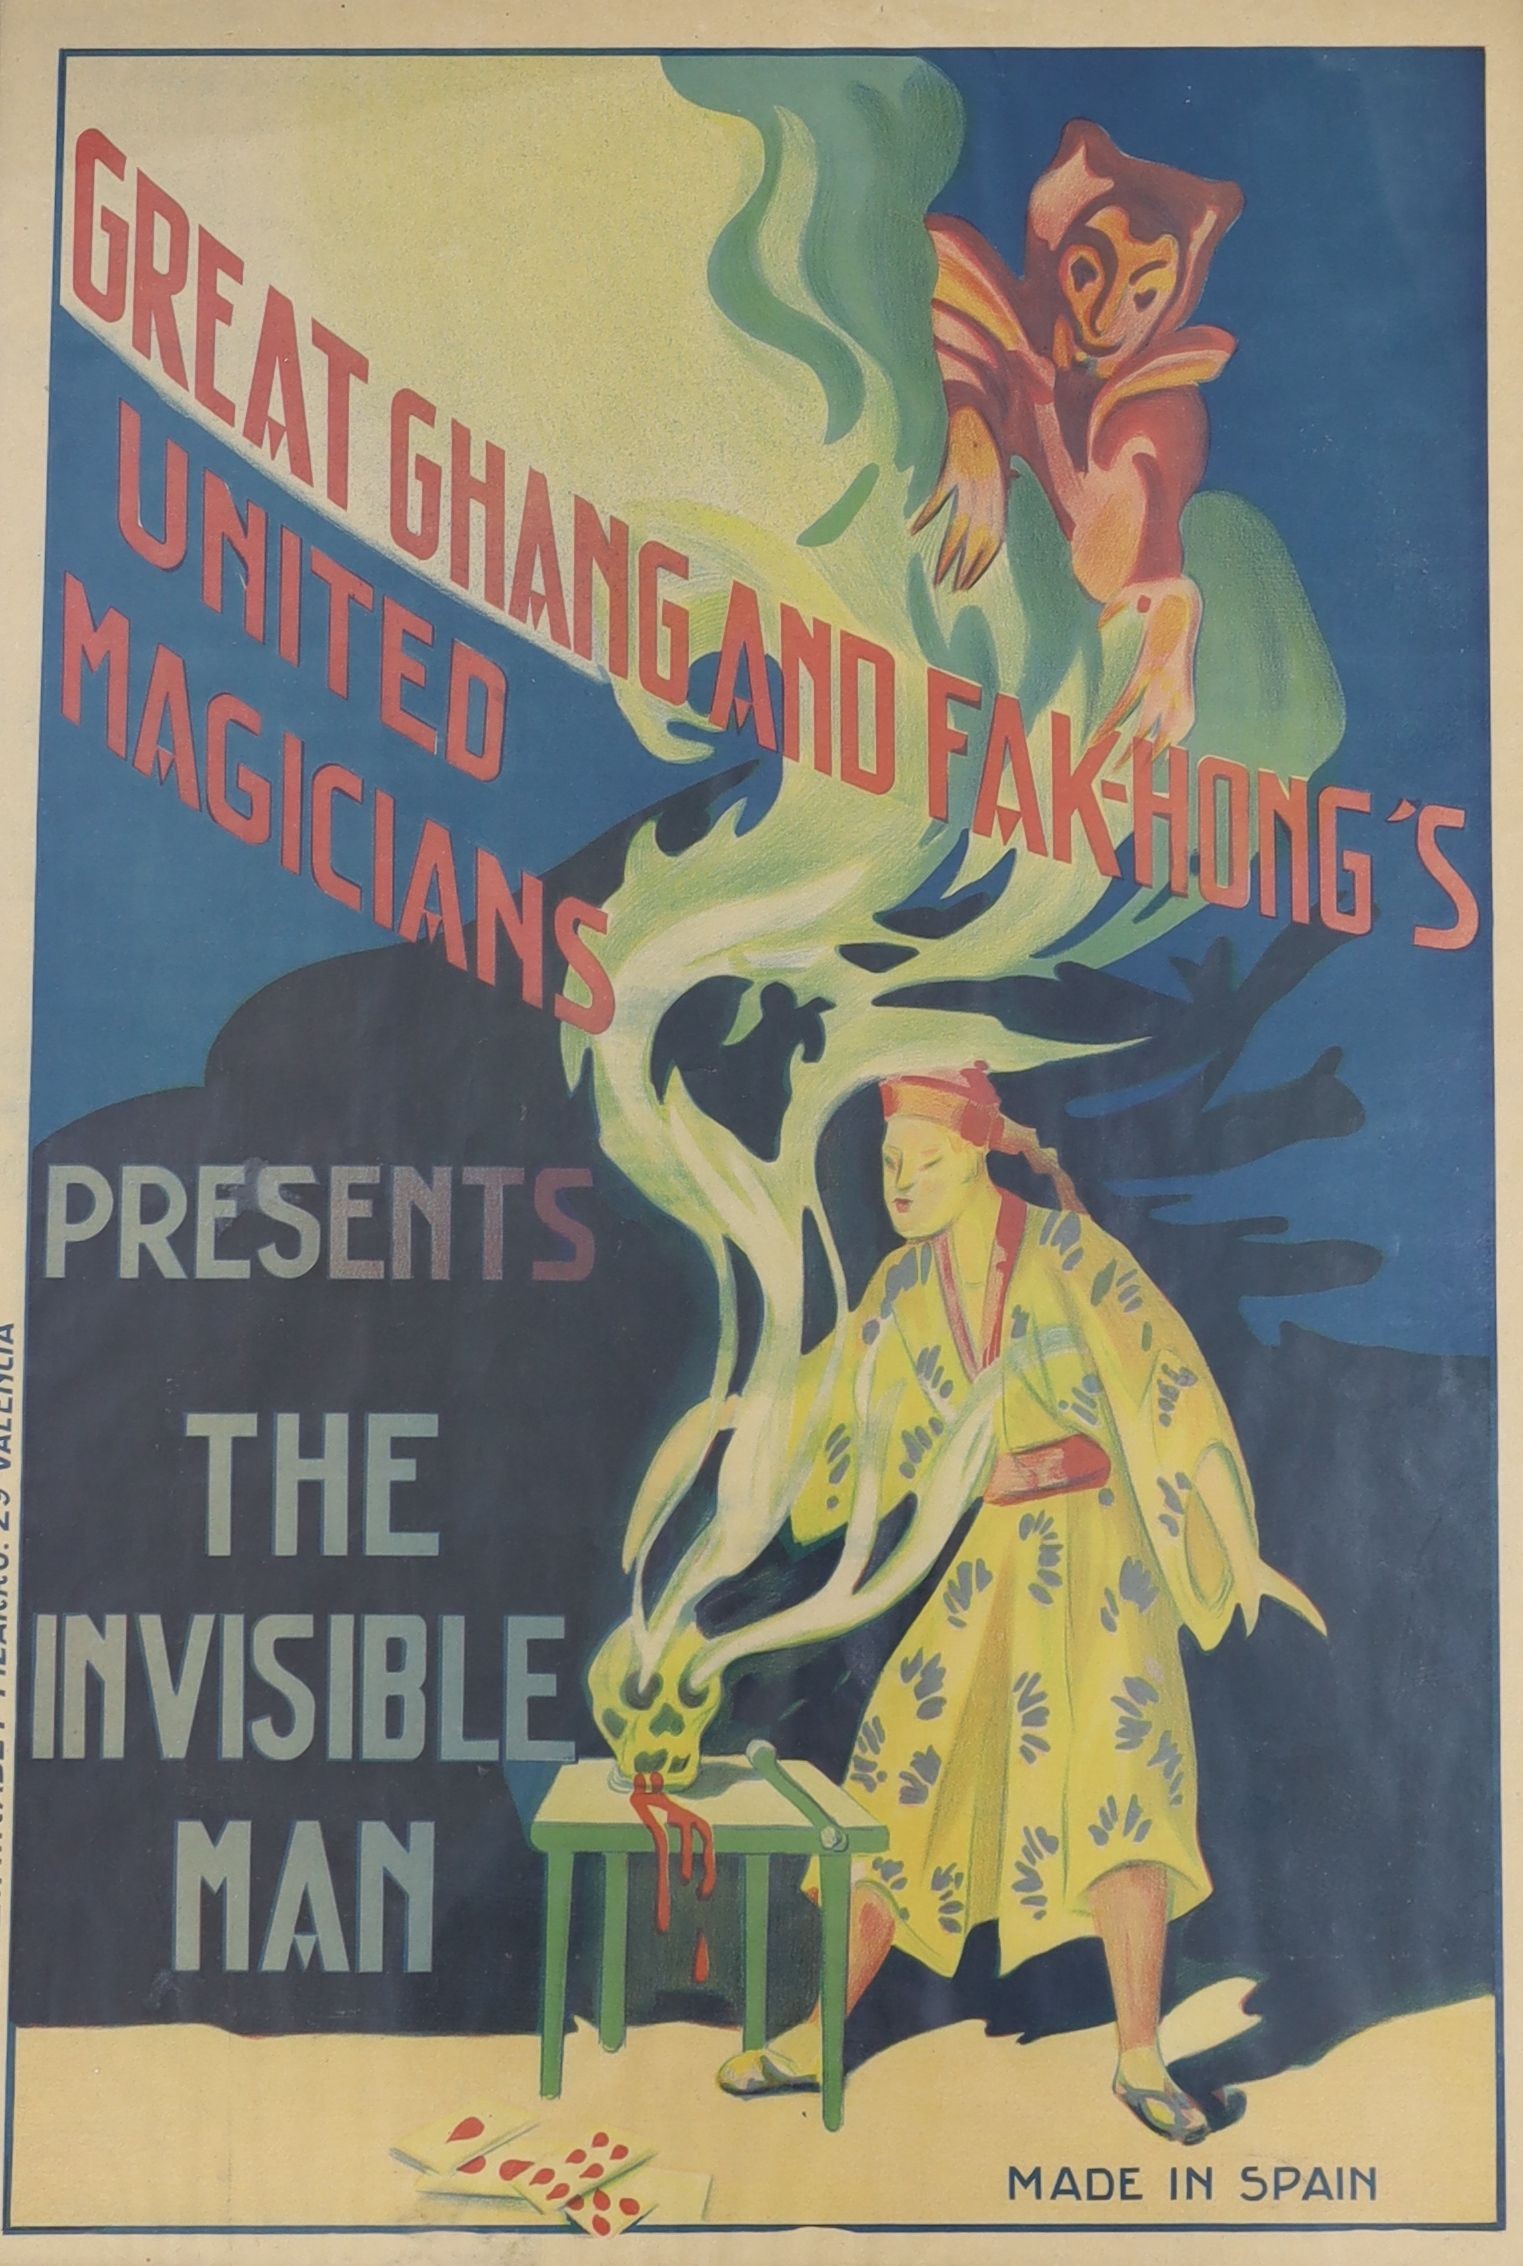 E.Mirabet lith. two colour lithographs, ‘Great Ghang and Fak-Hongs United Magicians presents The Invisible Man’, 63 x 43.5cm. and ‘Chang and Fak Hong’s United Magicians presents The Bhuda’, 63 x 44.5cm.